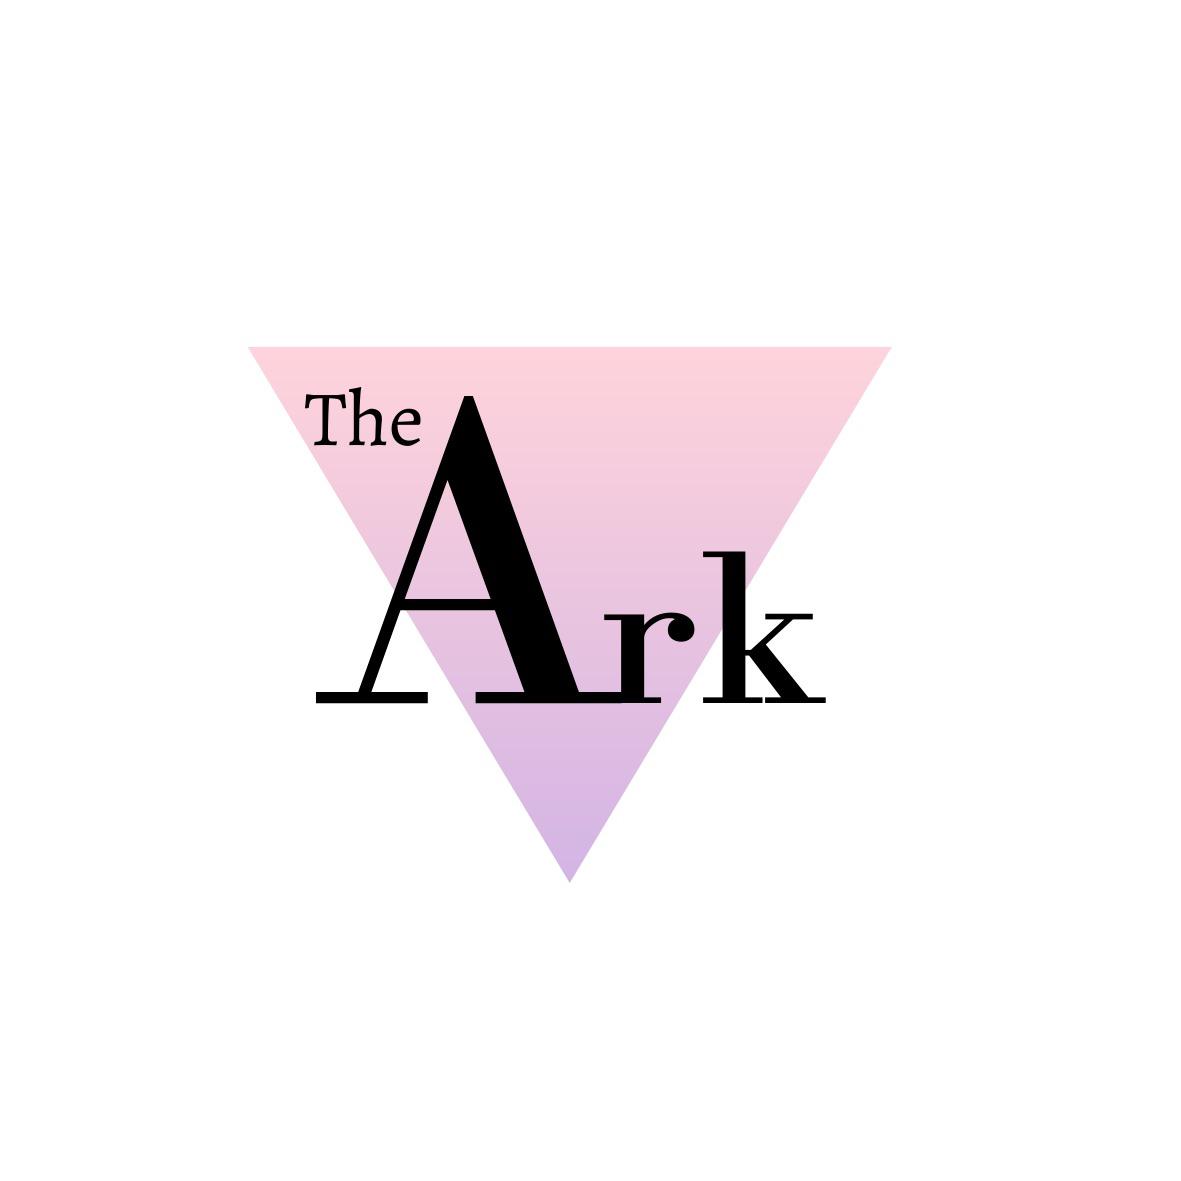 The Ark Beauty's images